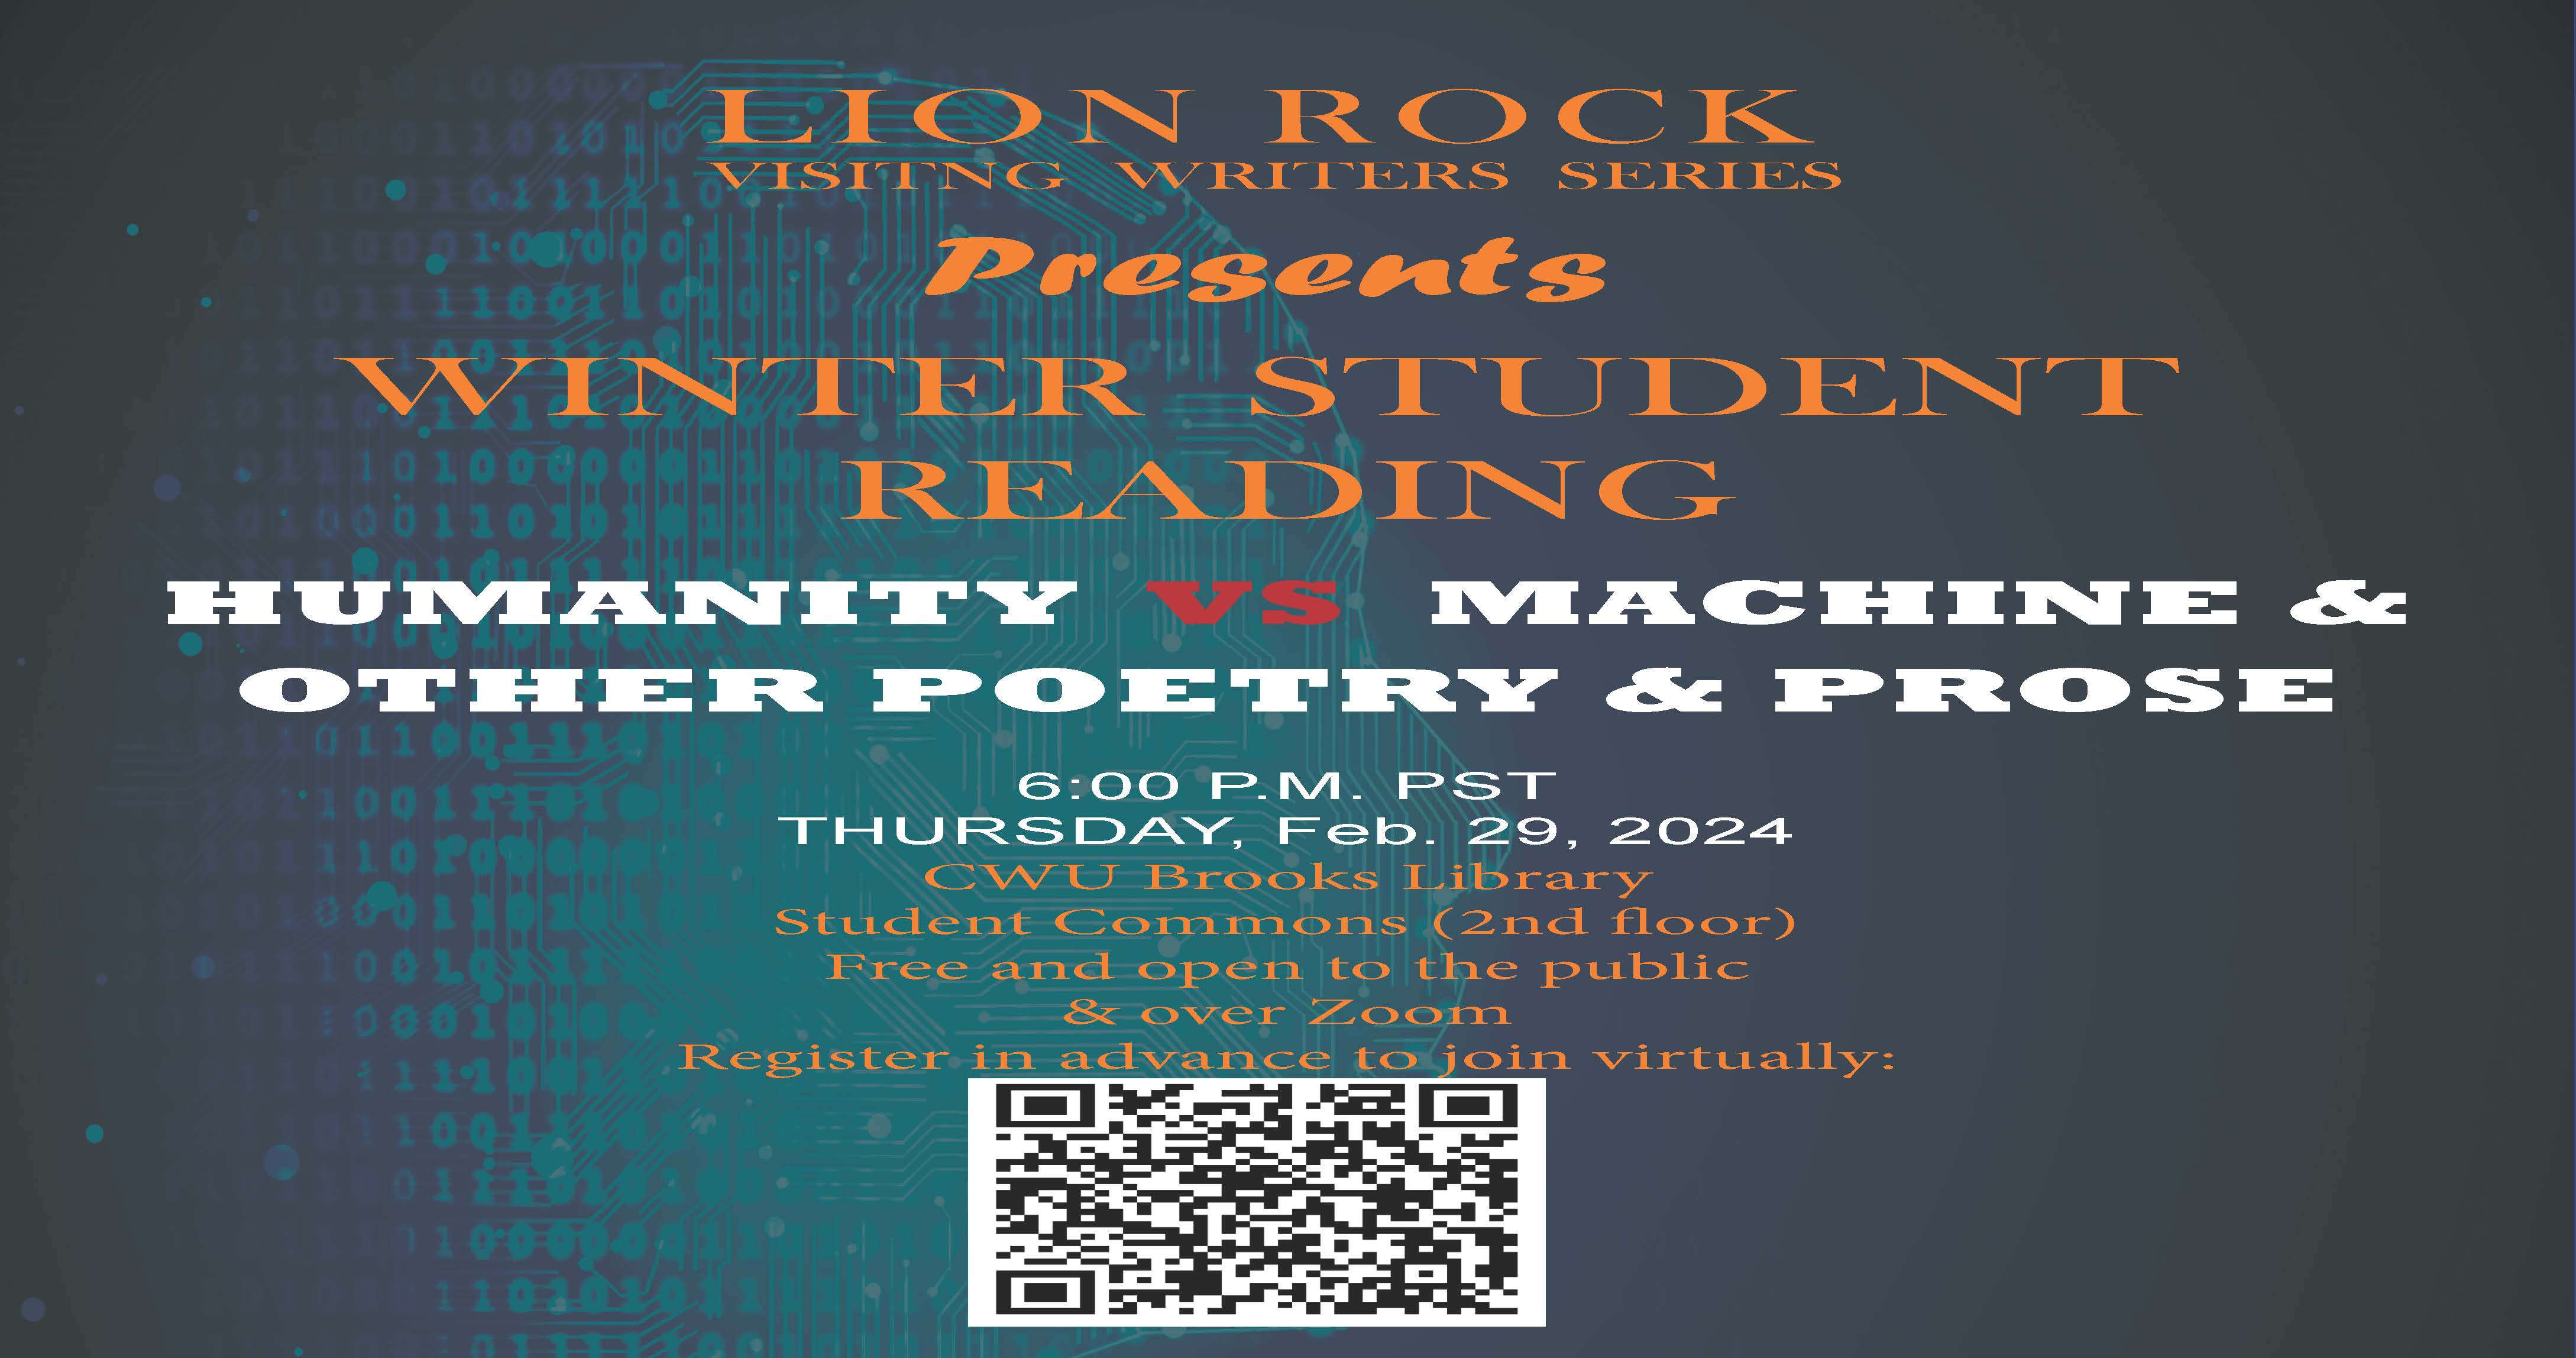 Poster about the Winter 2024 Student Reading